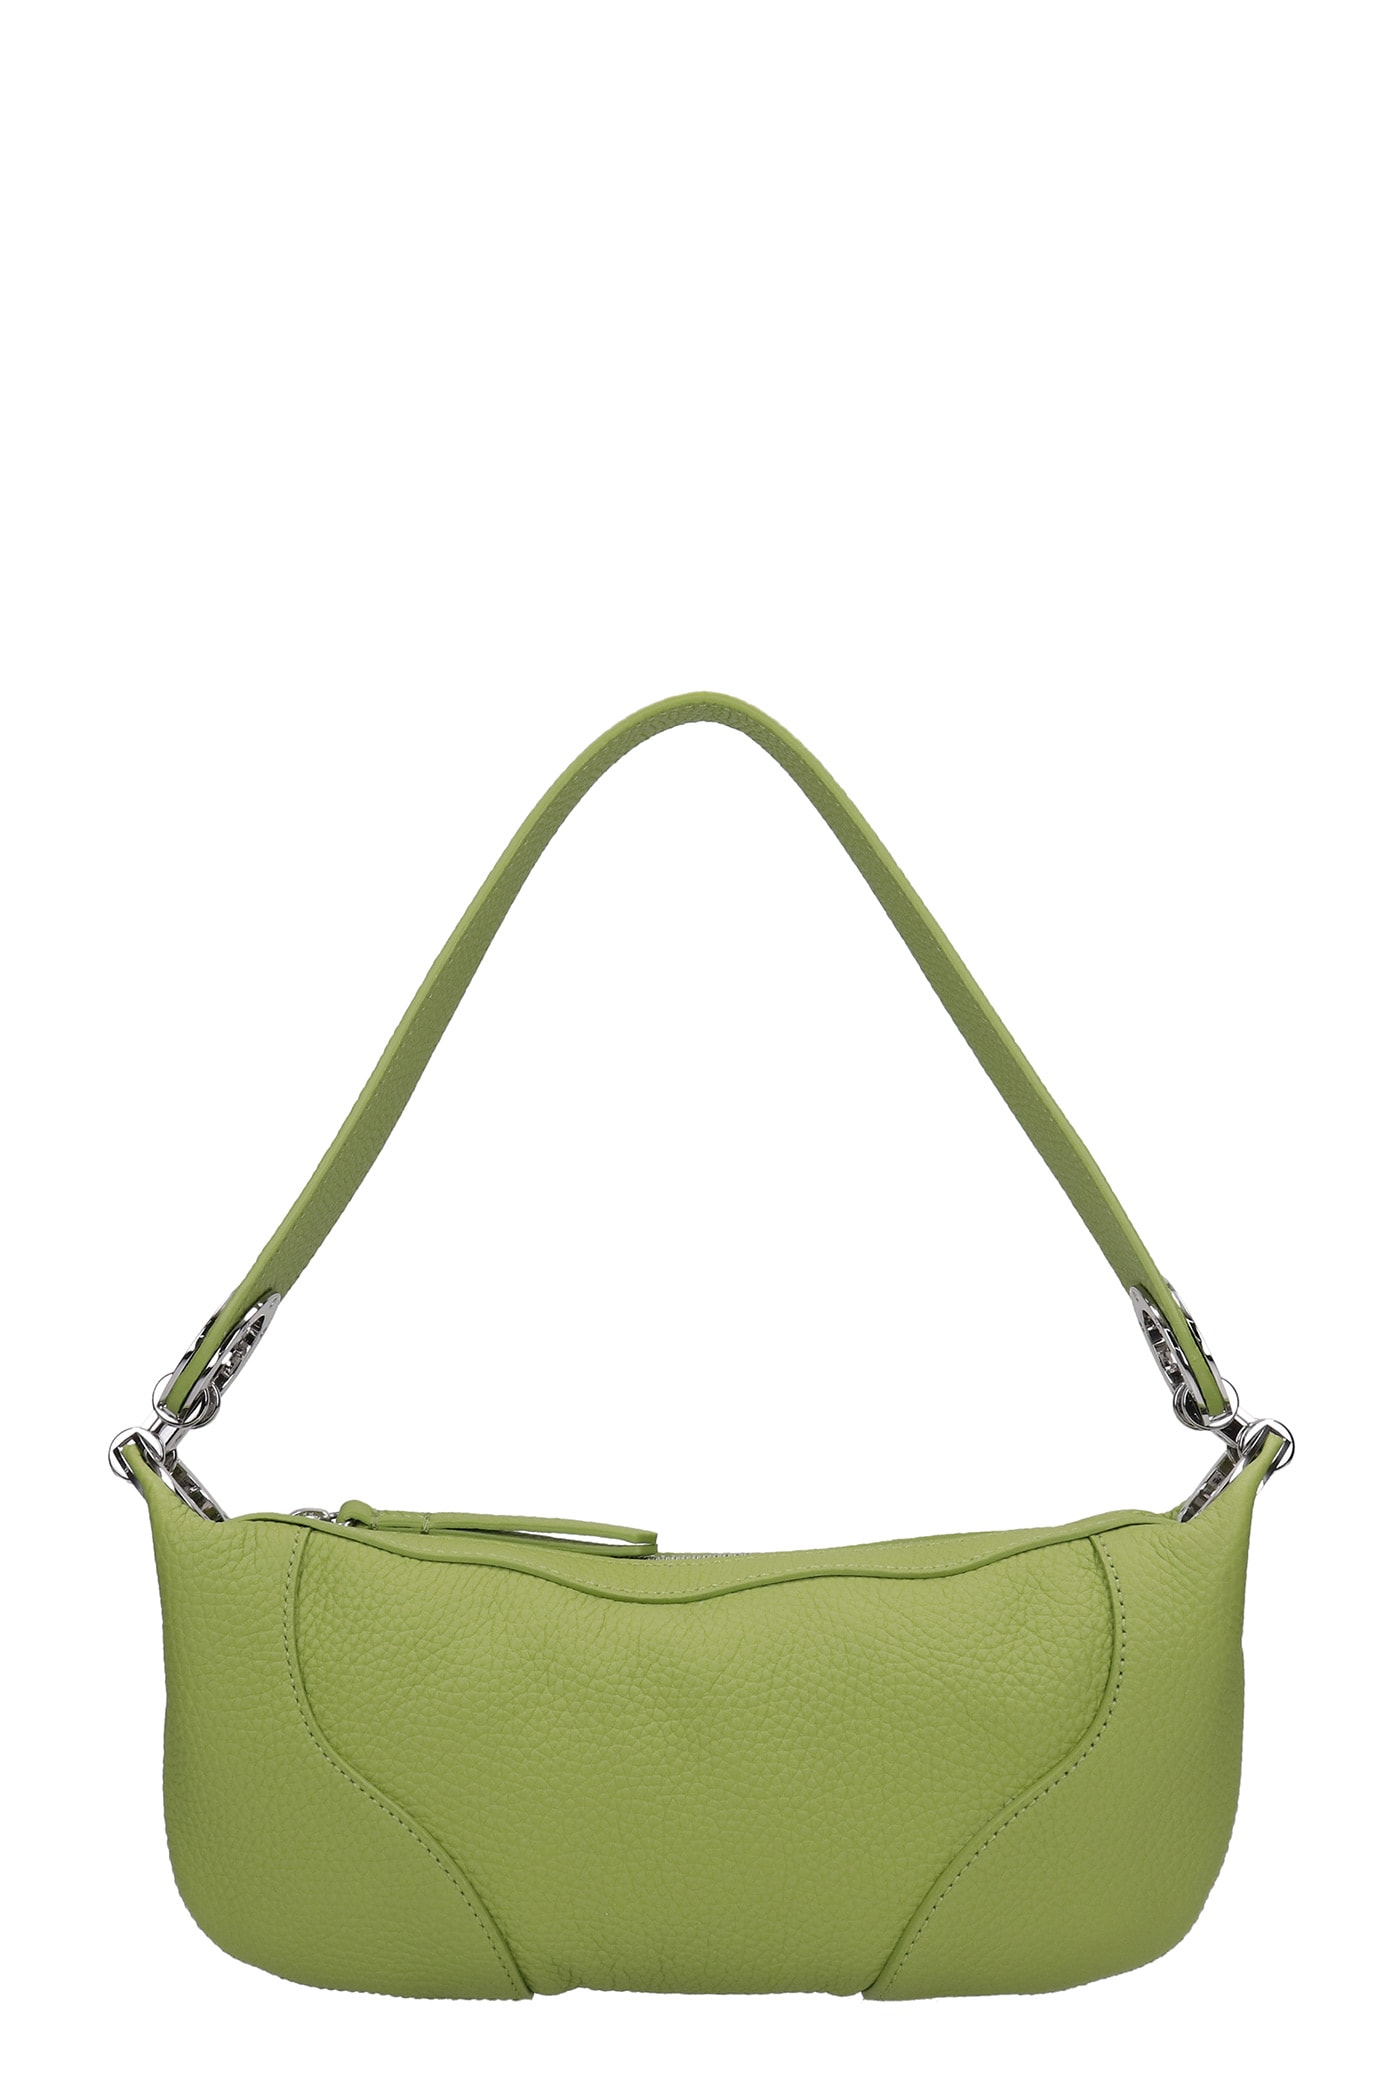 BY FAR Shoulder Bag In Green Leather